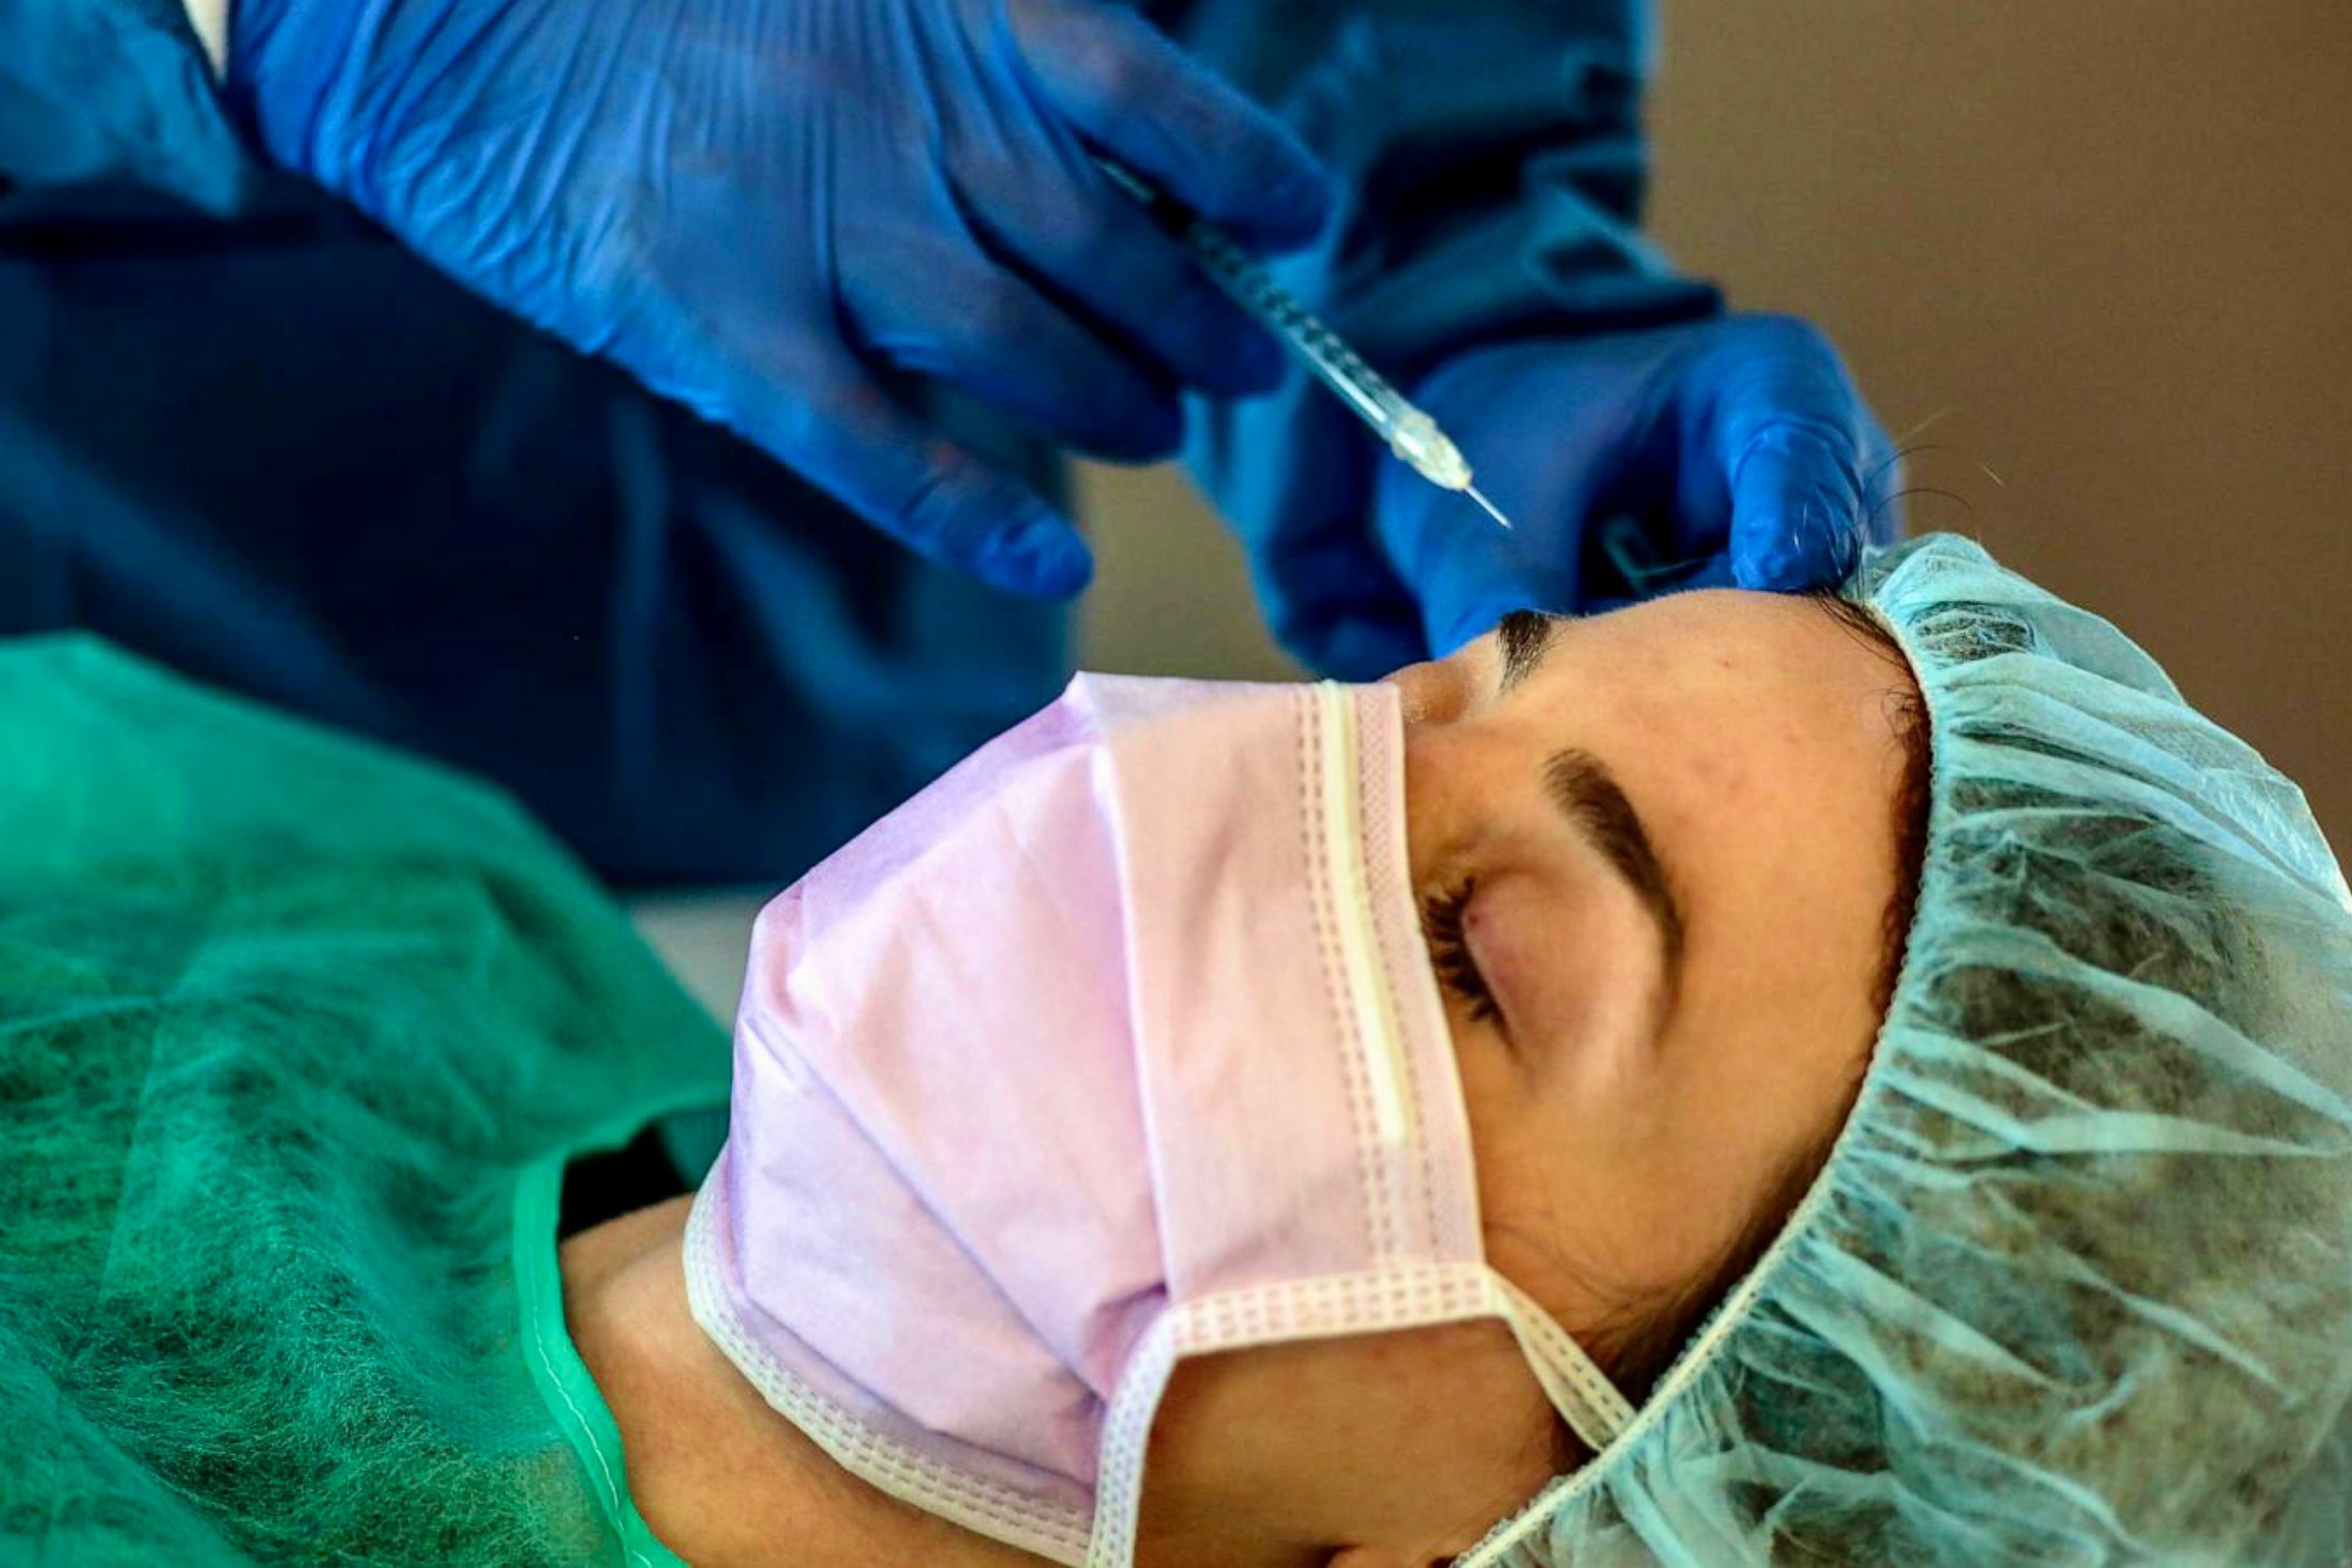 The medical beauty industry has a bright future as plastic surgery emerges globally. (Photo / Retrieved from European Pressphoto Agency)